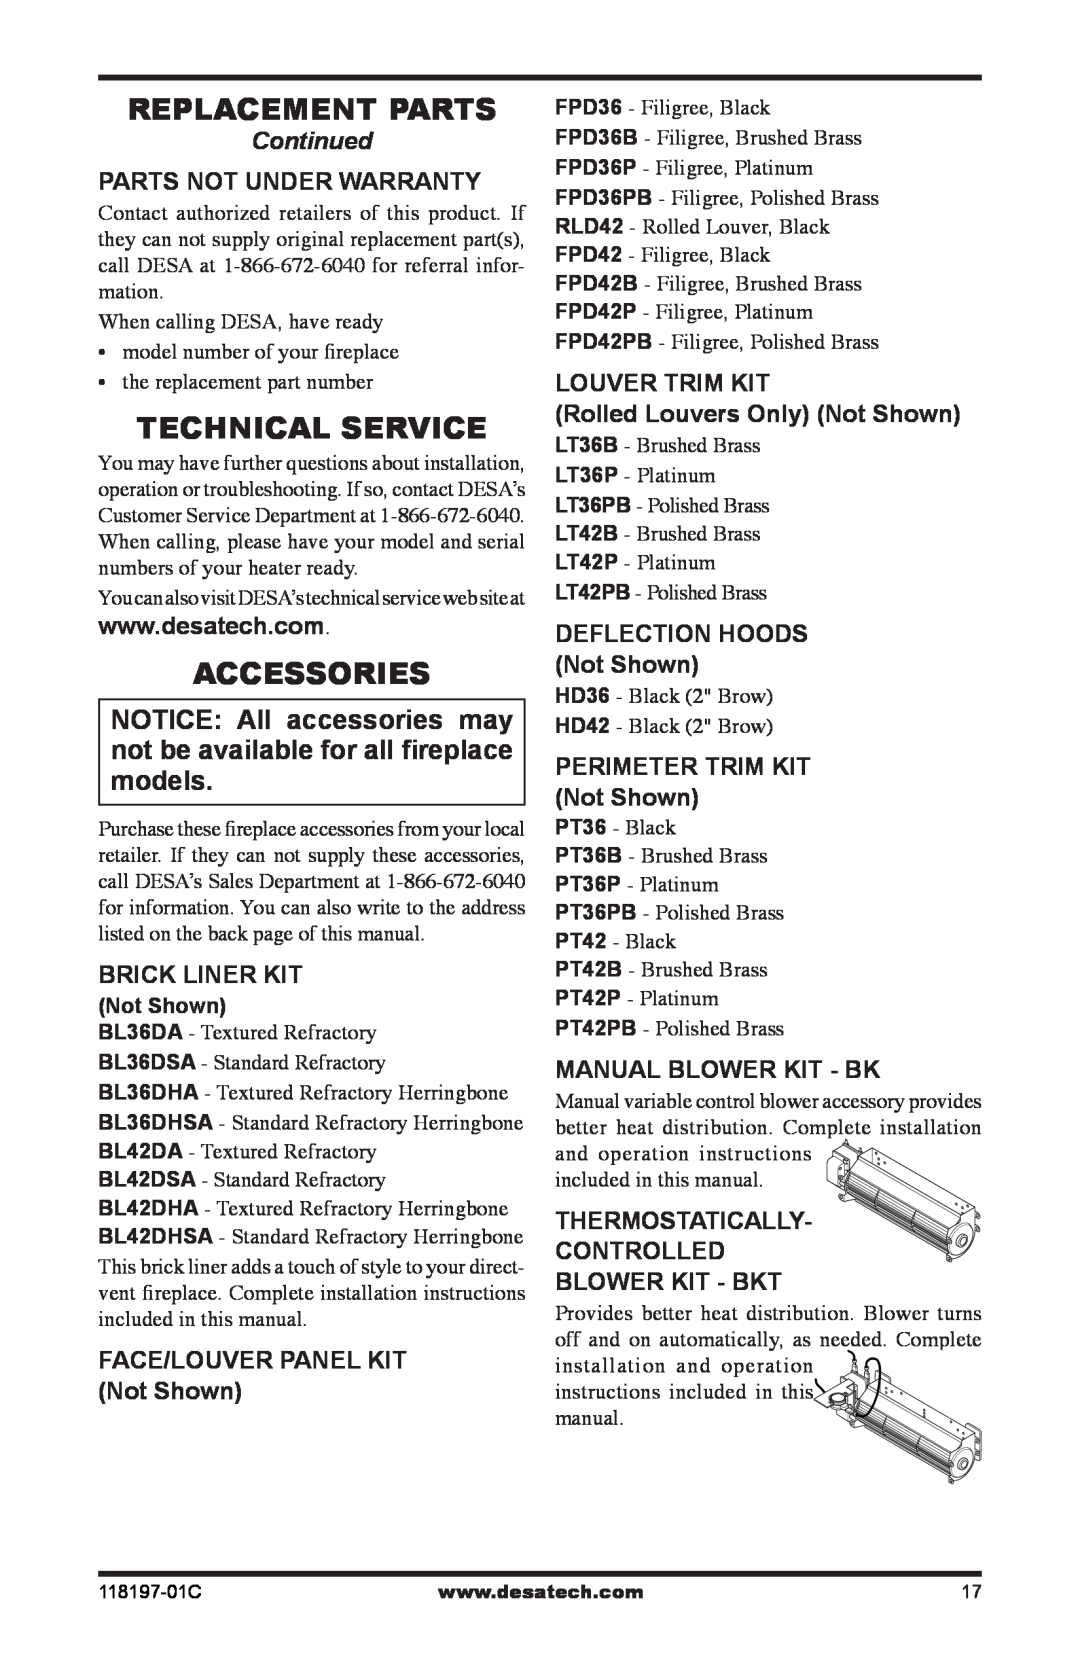 Desa (V)DVC36(B)(H), (V)DVC42(B)(H) Replacement Parts, Technical Service, Accessories, Continued, Not Shown 